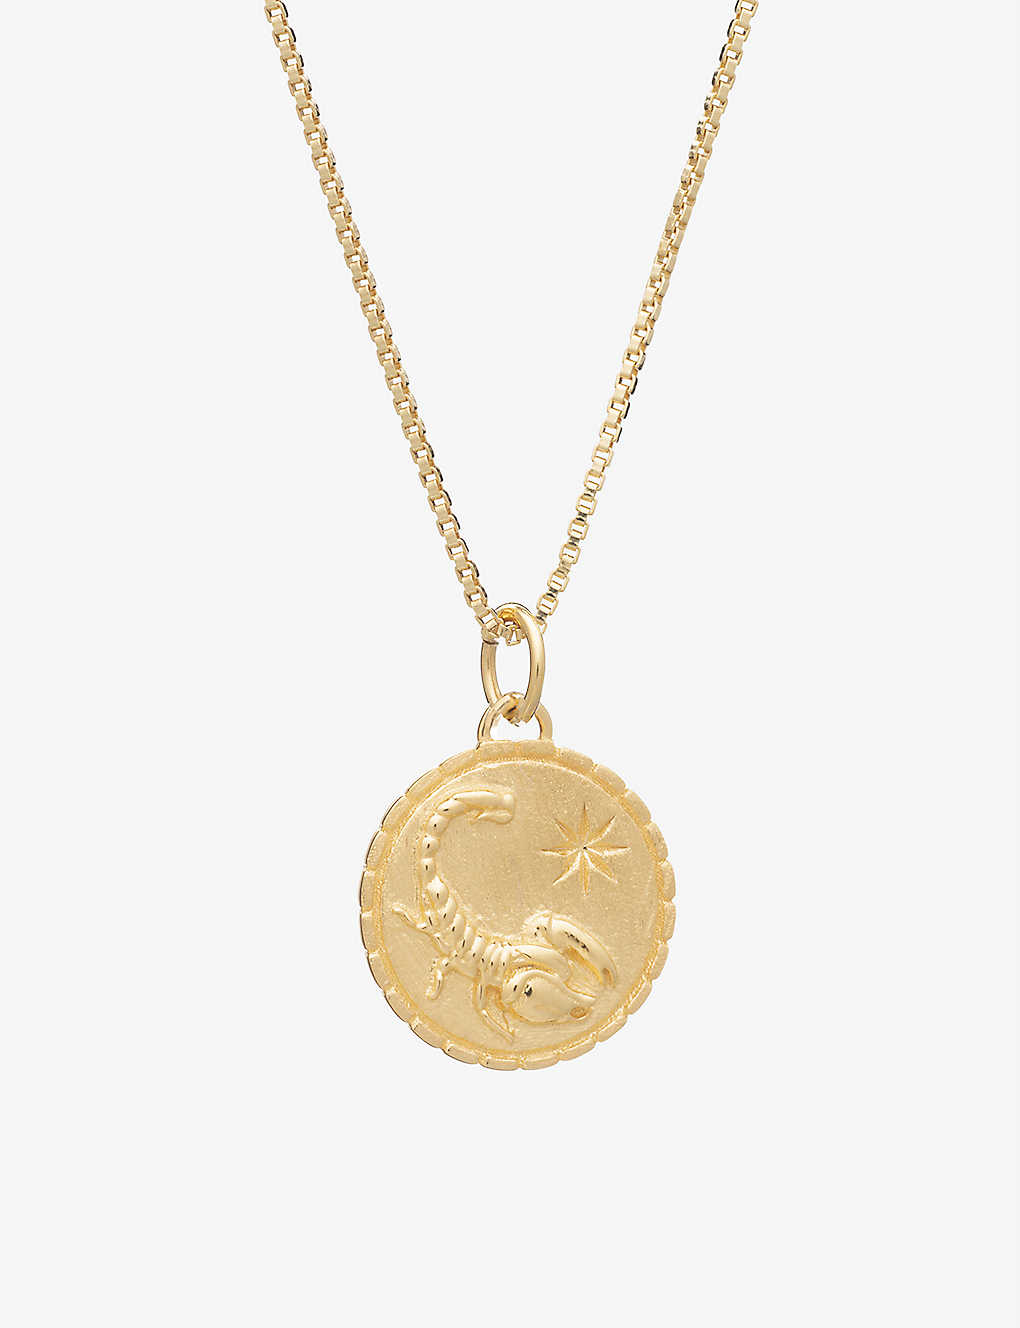 Rachel Jackson Zodiac Coin Scorpio 22ct Yellow Gold-plated Sterling-silver Pendant Necklace In 22 Carat Gold Plated